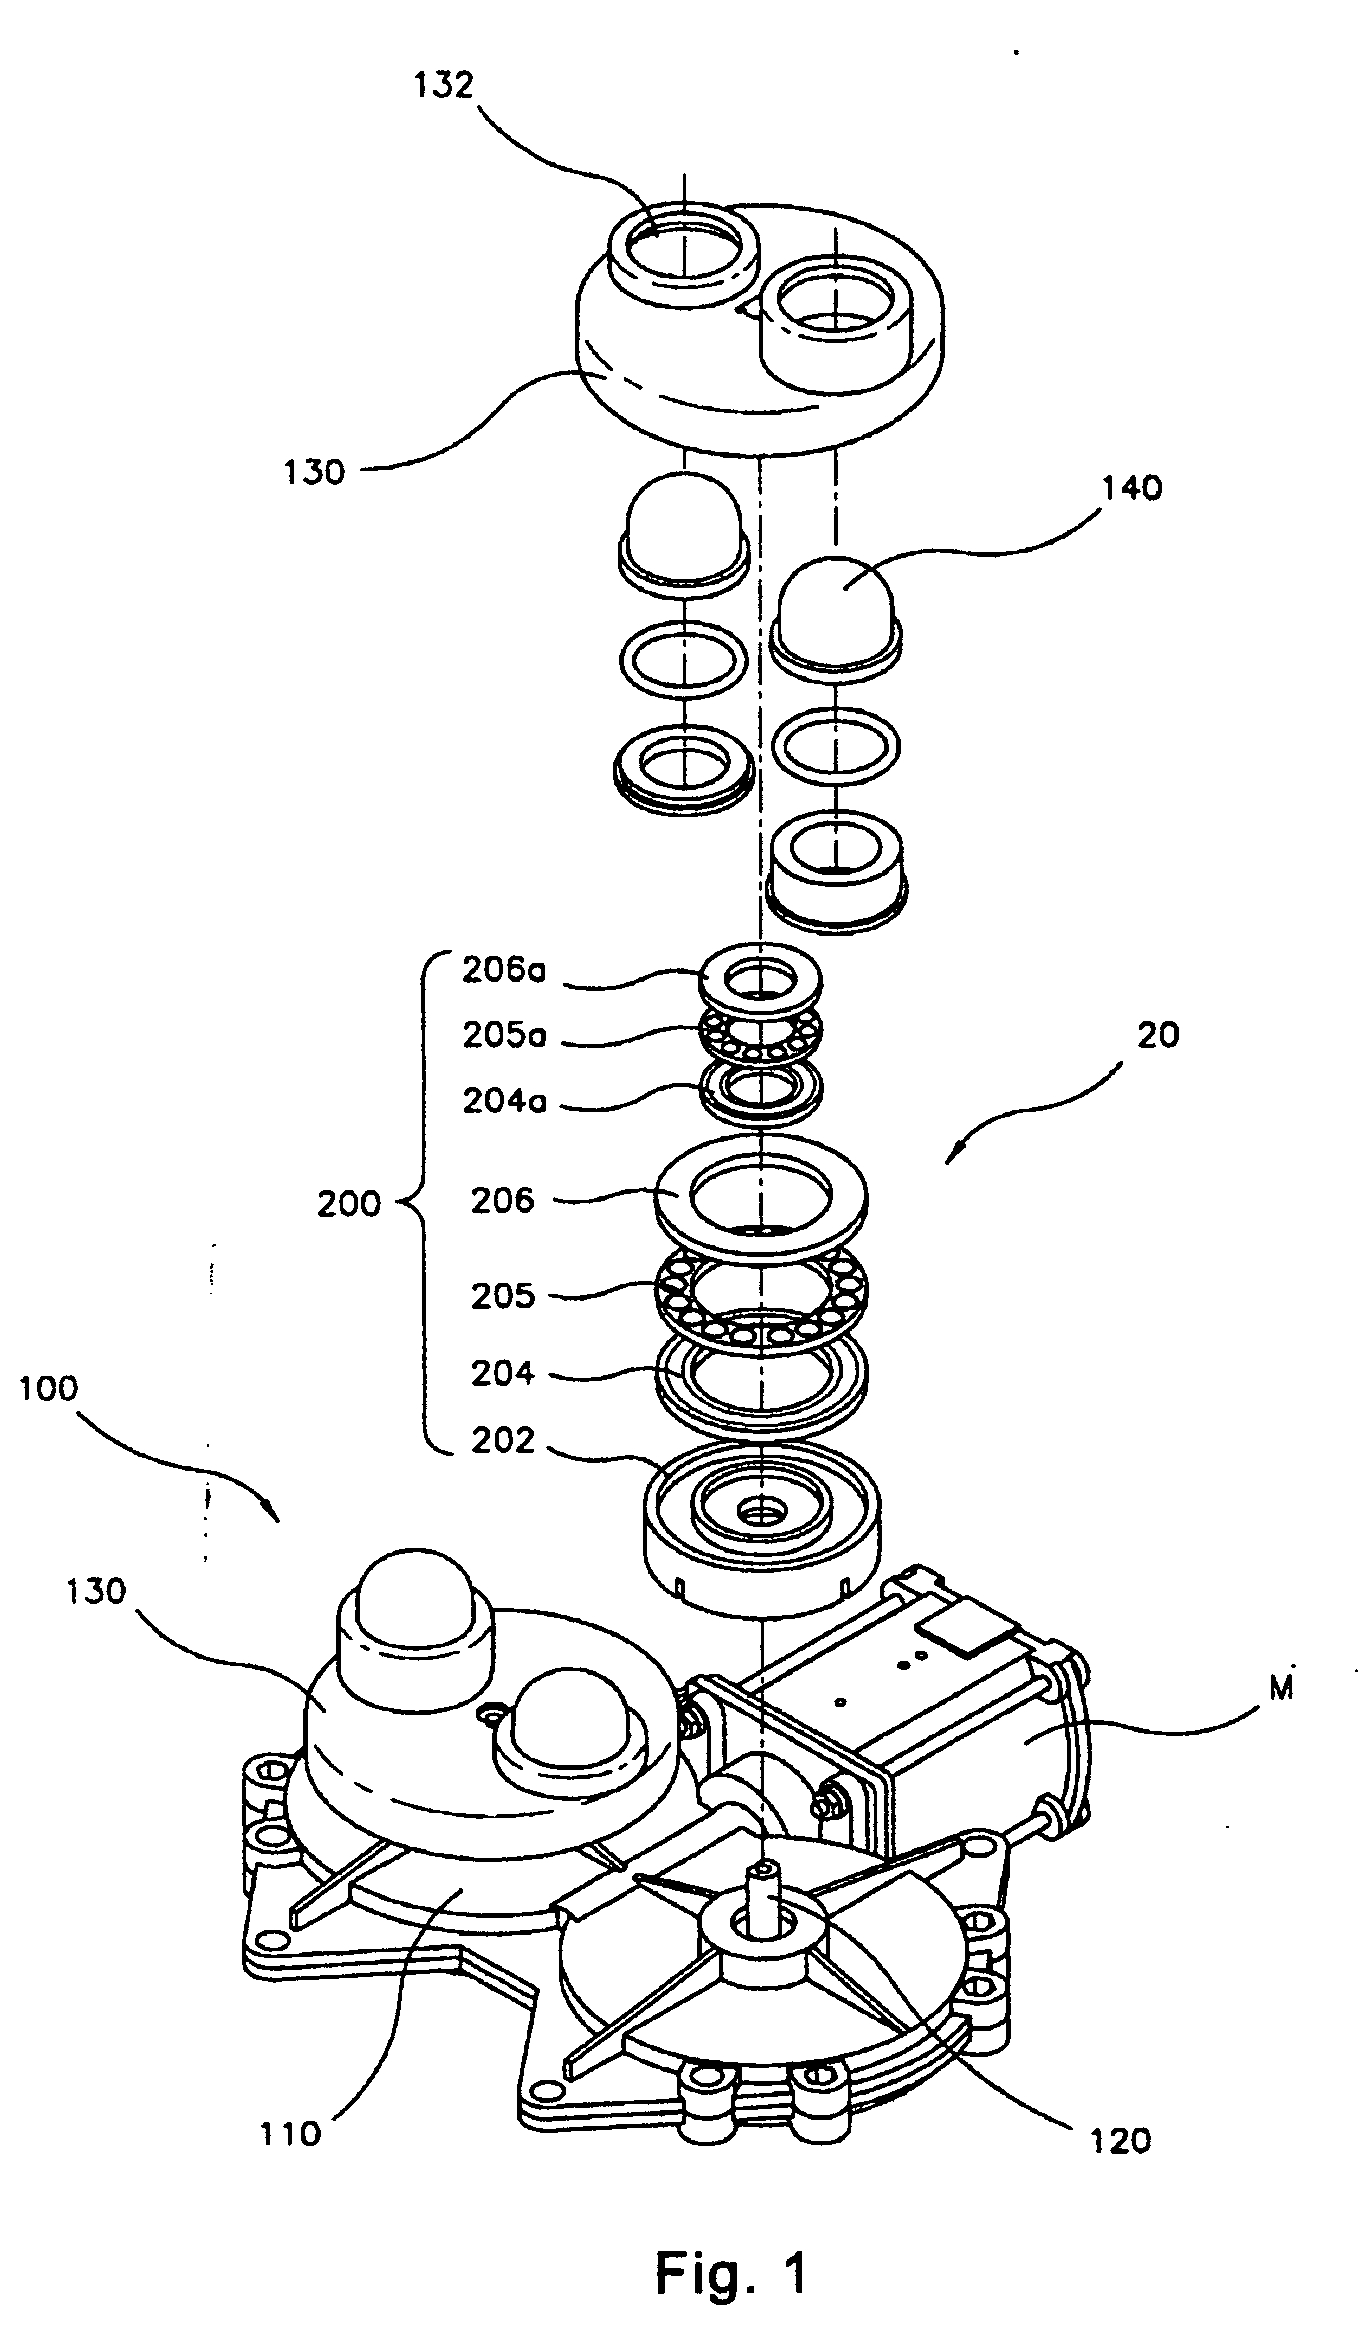 Far infra-red ray and anion emitting thermal rotary massage device for decreasing the fat in the abdominal region of a human body